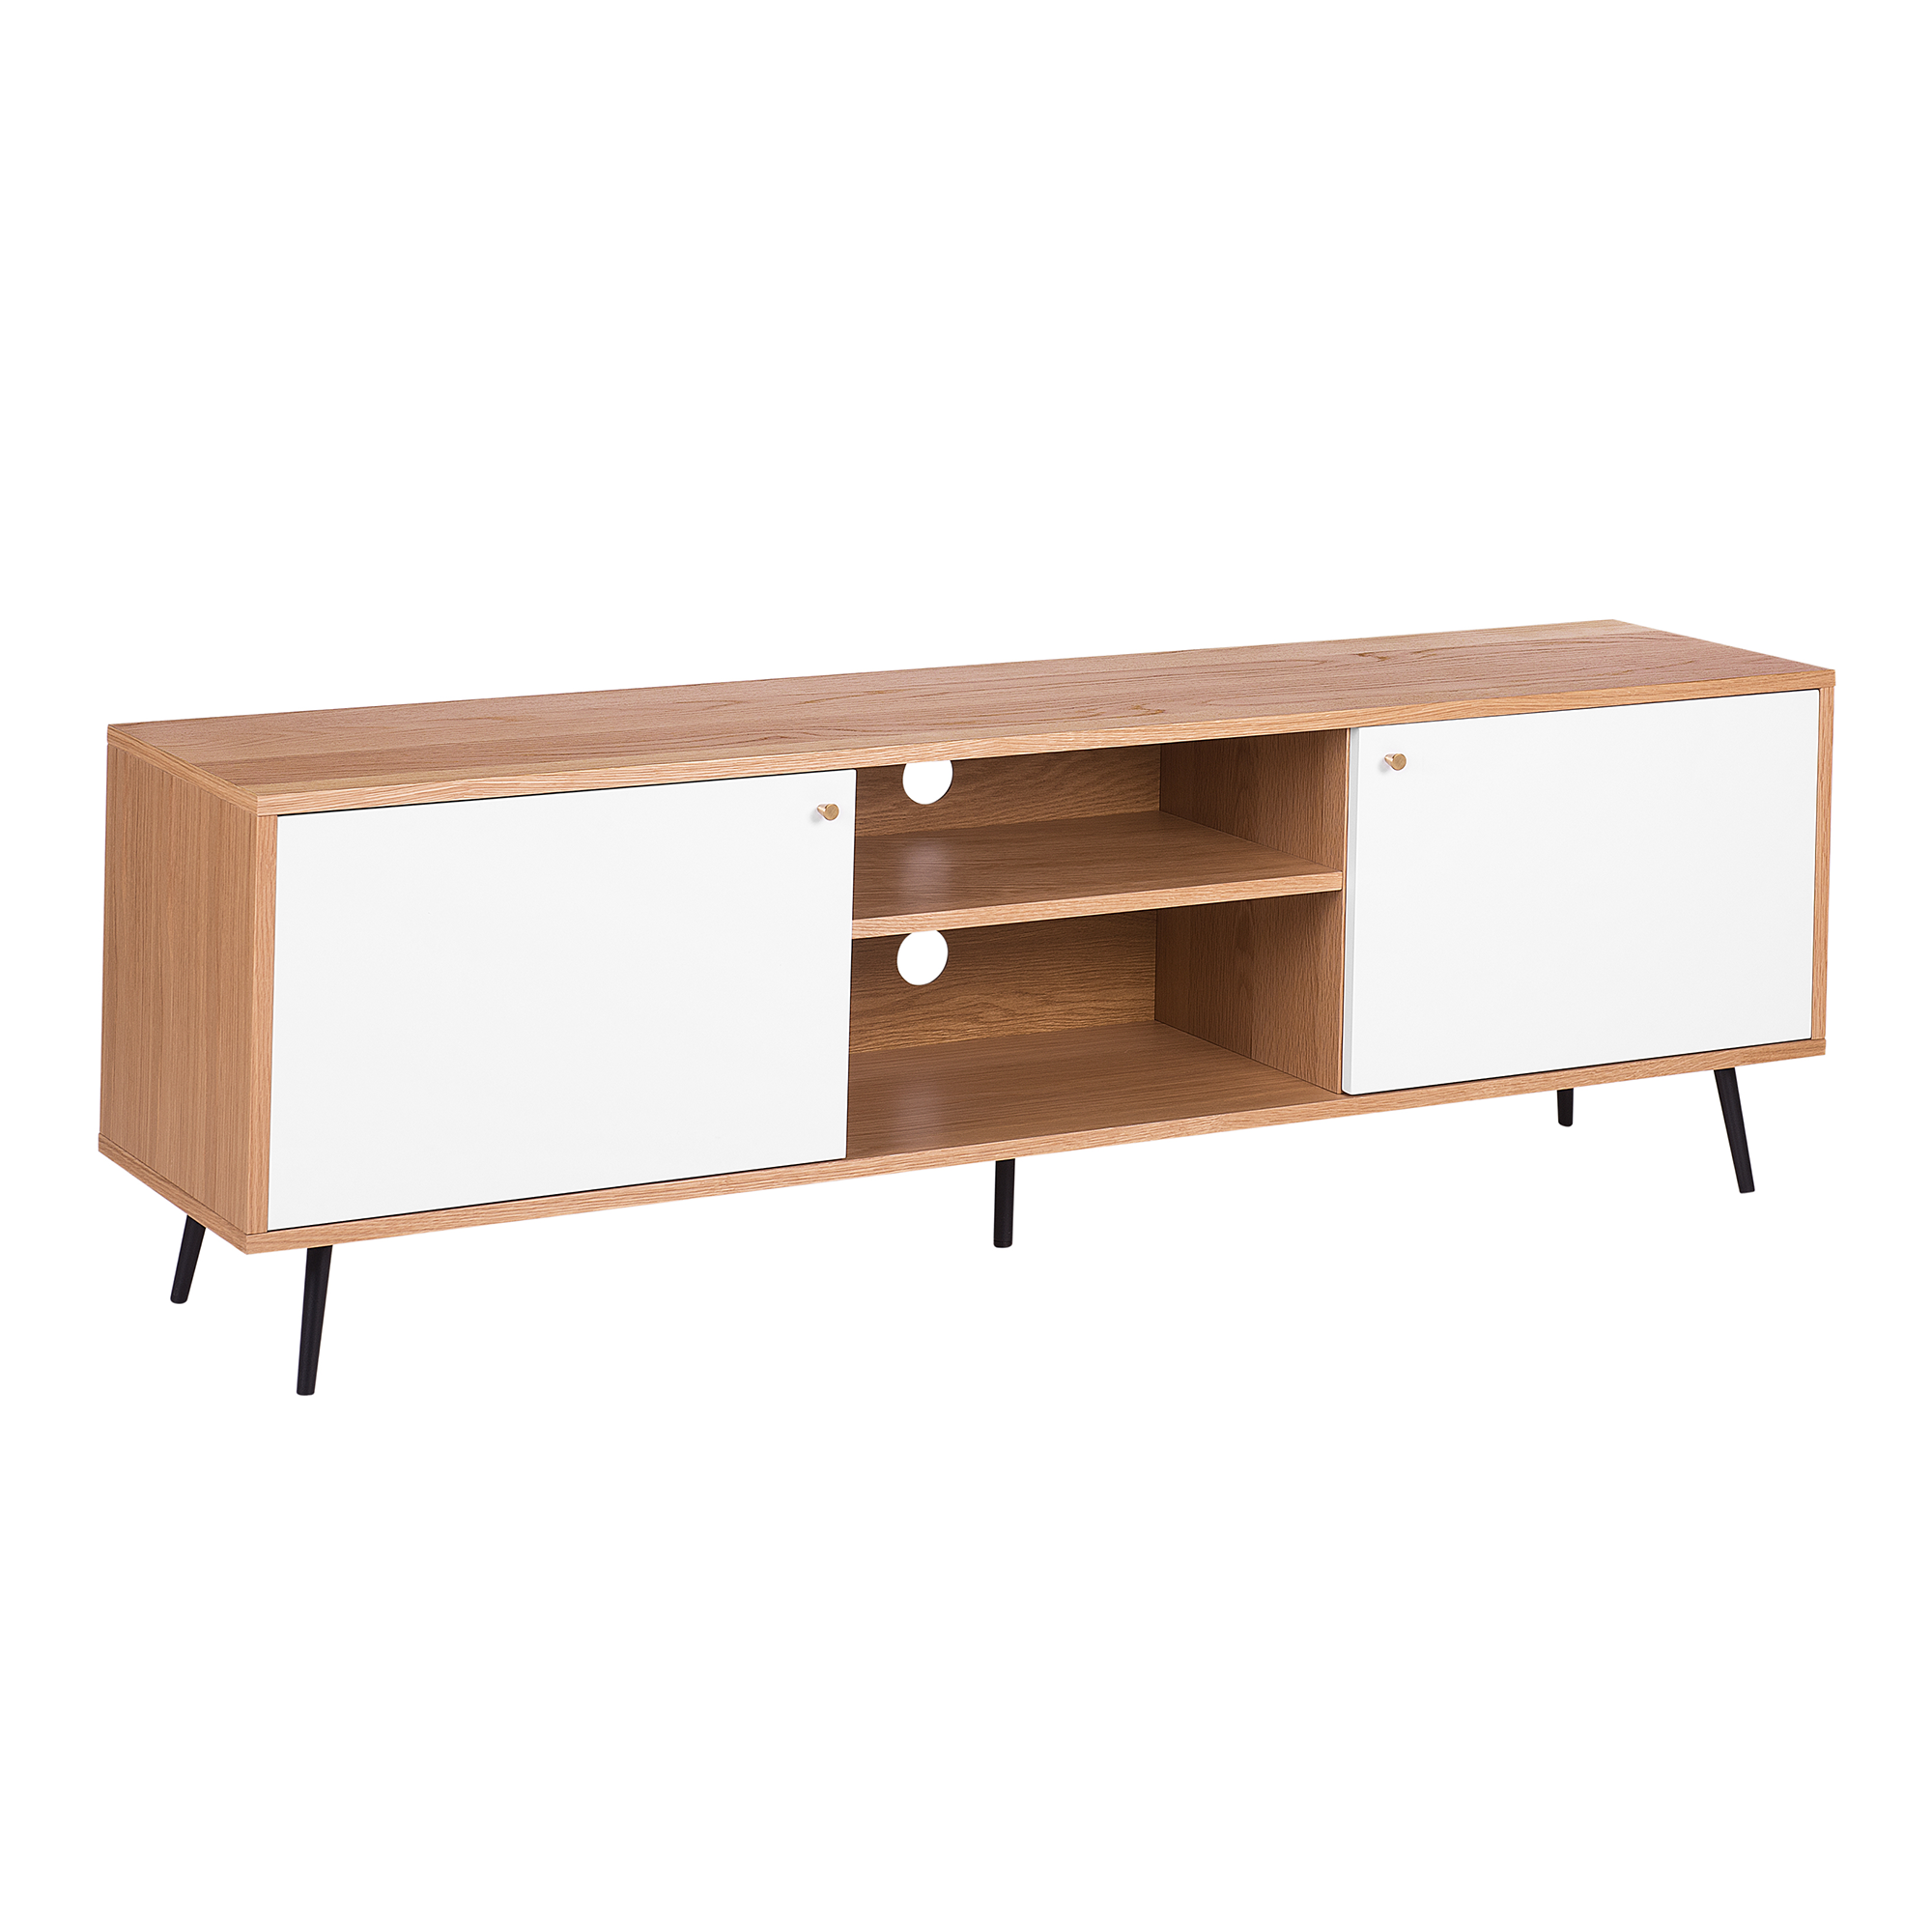 Beliani TV Stand Light Wood and White Manufactured Wood Storage Unit with Shelves and Cabinets Scandinavian Design